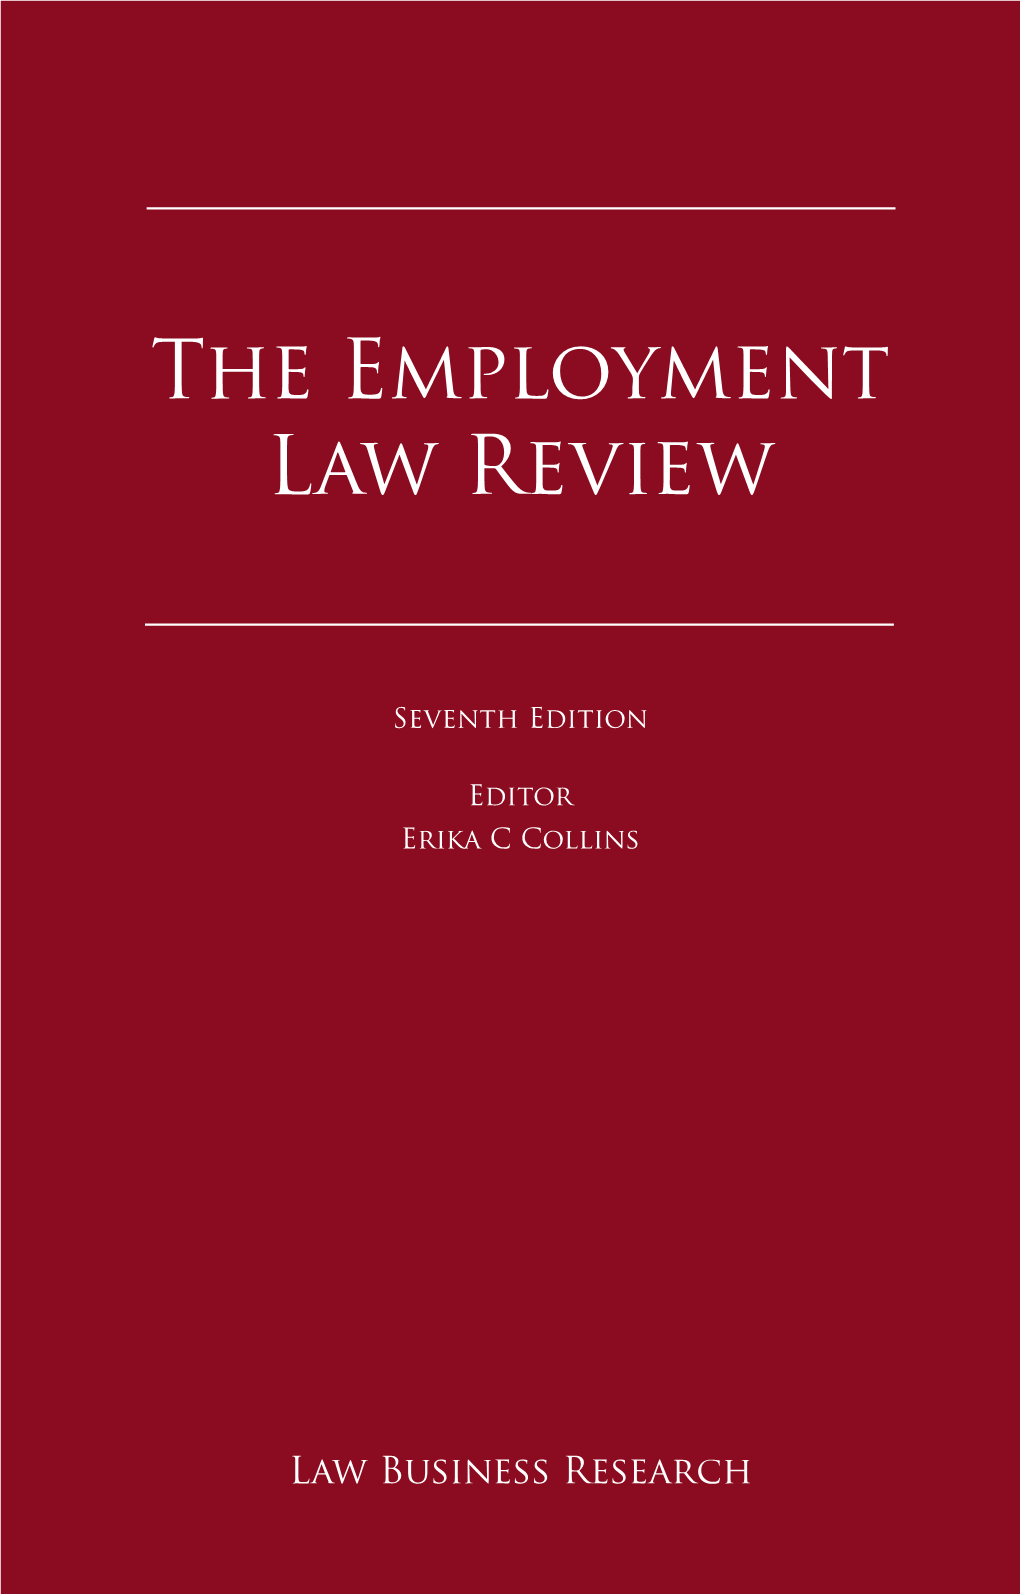 The Employment Law Review